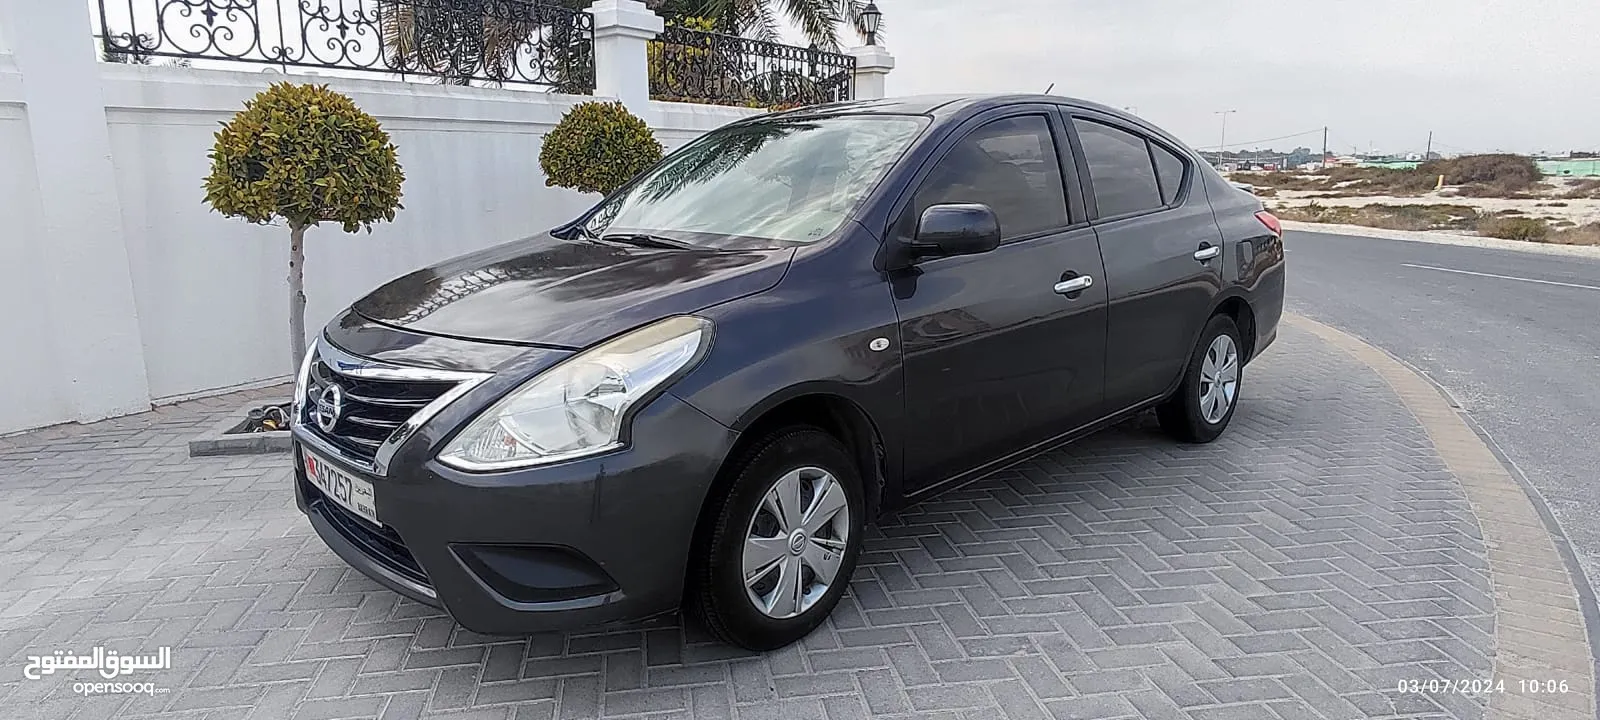 Nissan sunny model 2019 for sale good condition